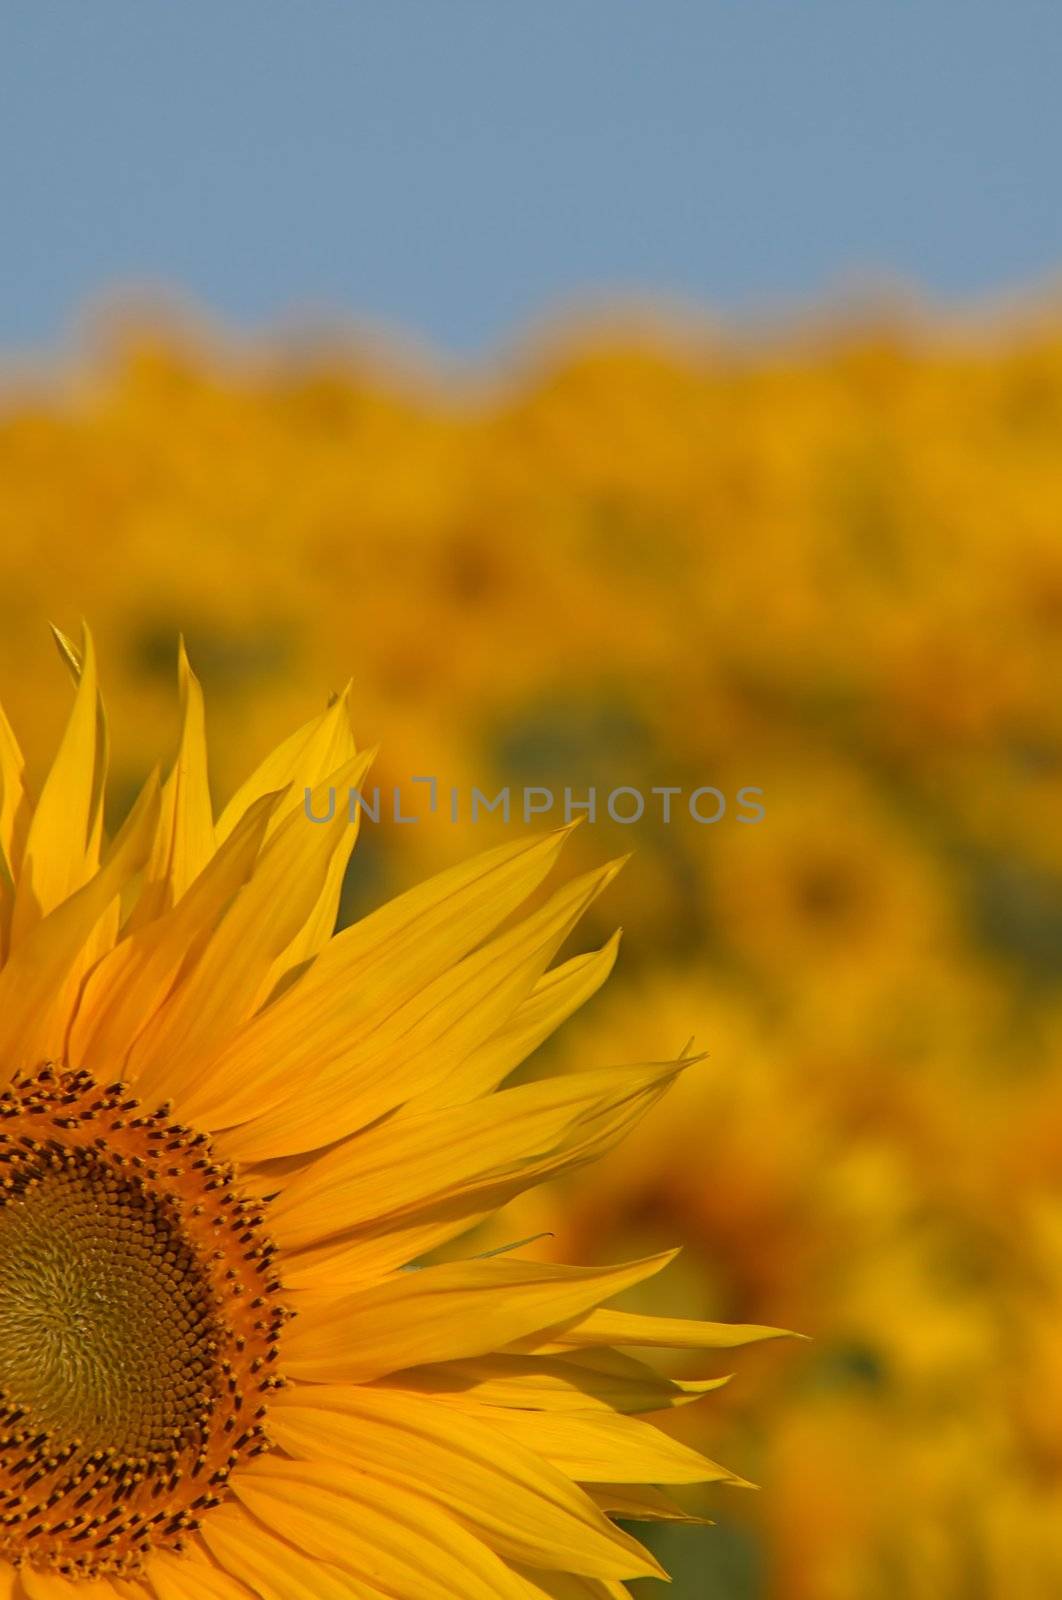 An image of yellow sunflowers and blue sky